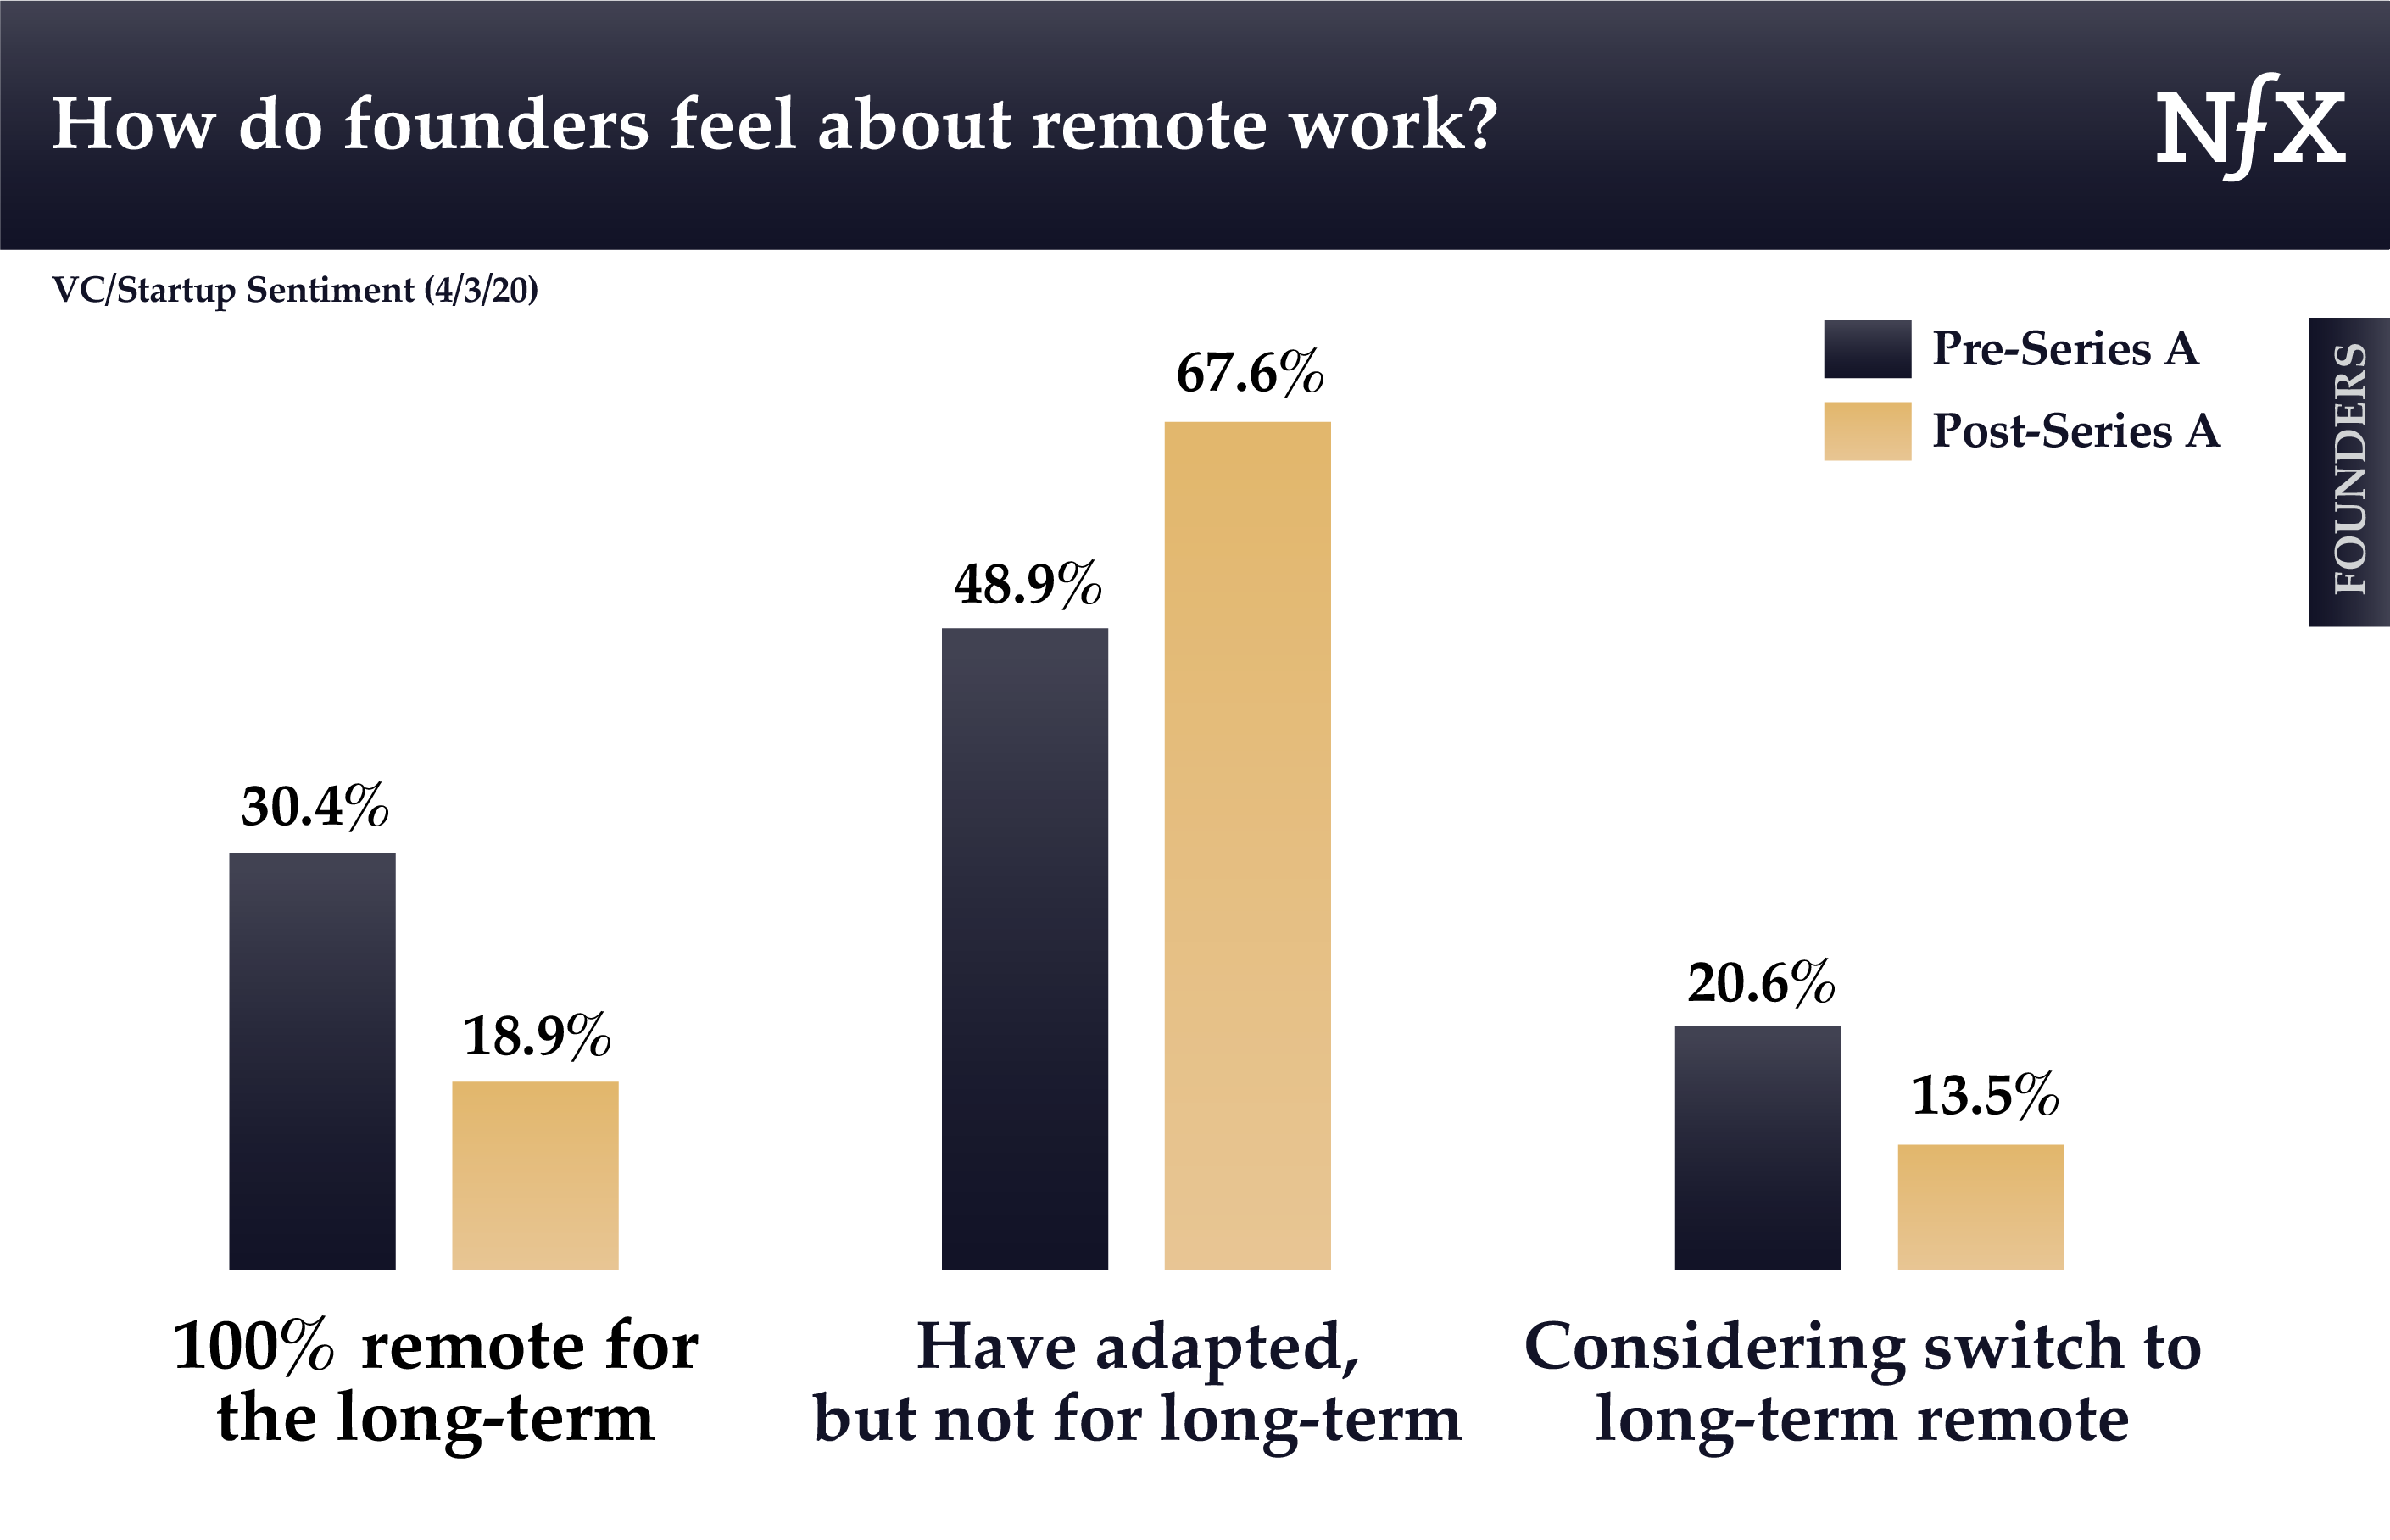 How are founders feeling about remote work during COVID-19?